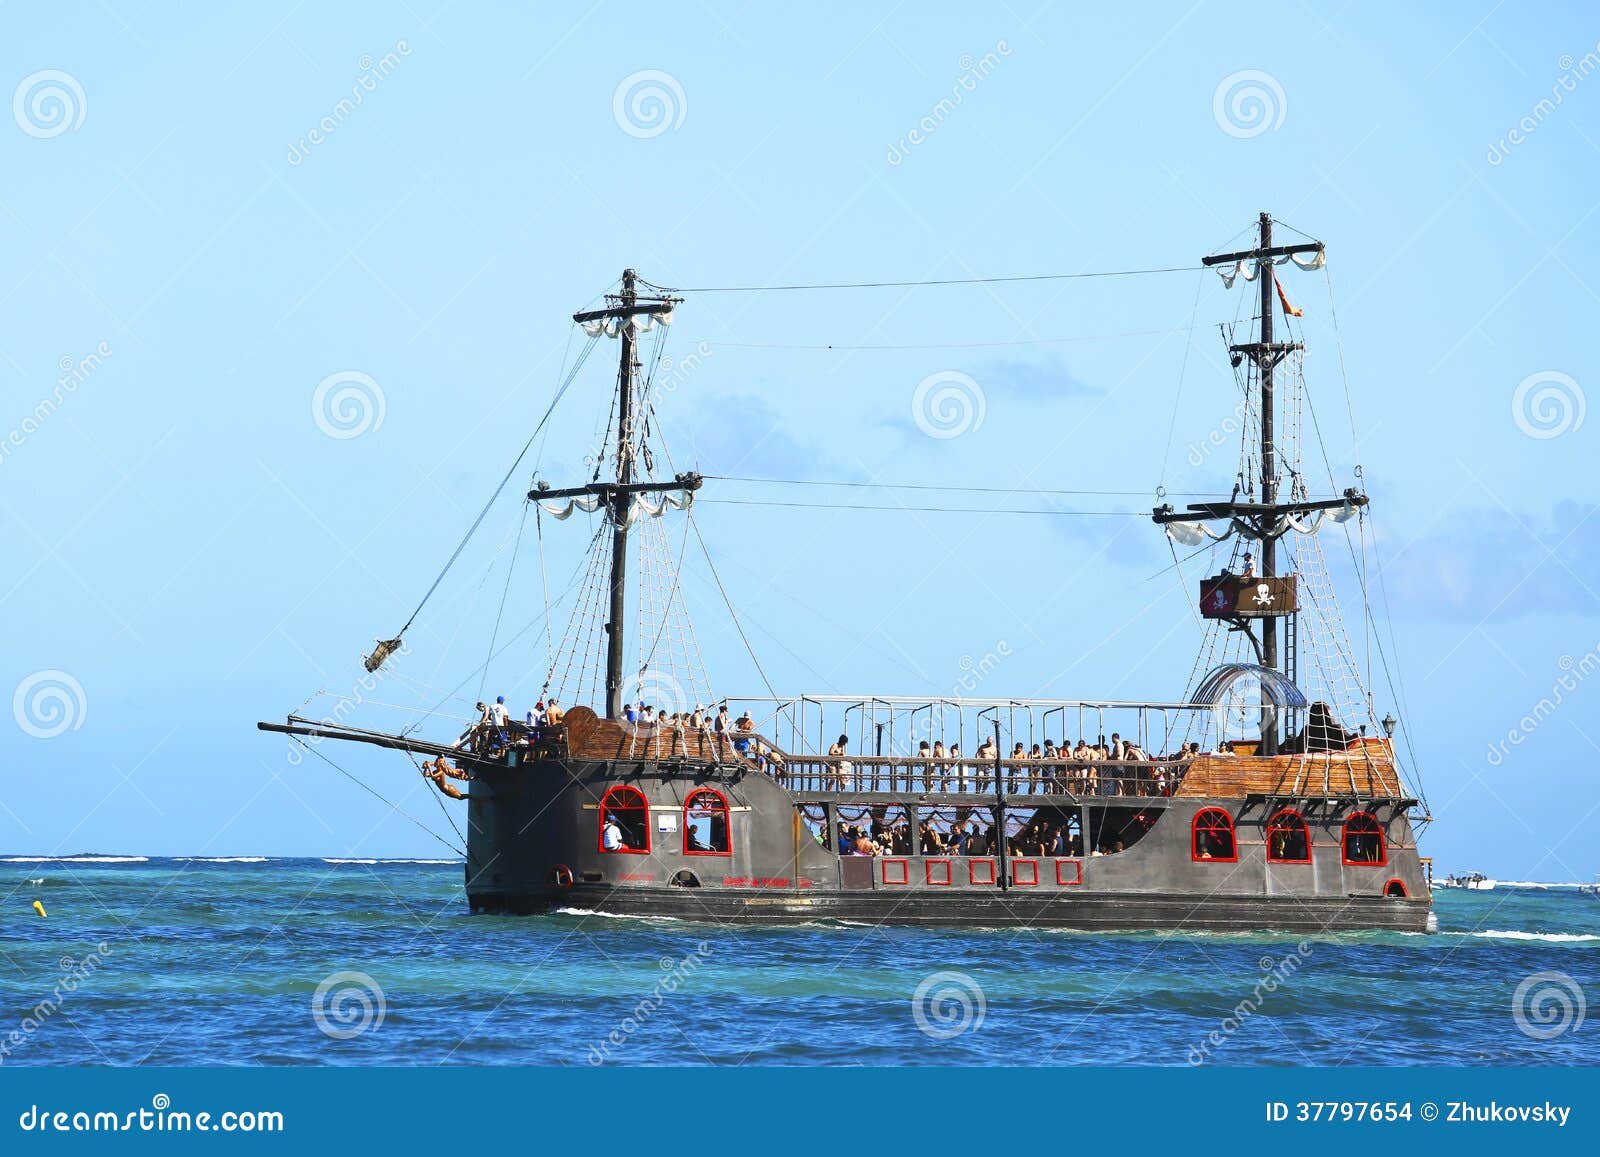 PUNTA CANA, DOMINICAN REPUBLIC - JANUARY 3: Pirate party boat in Punta 